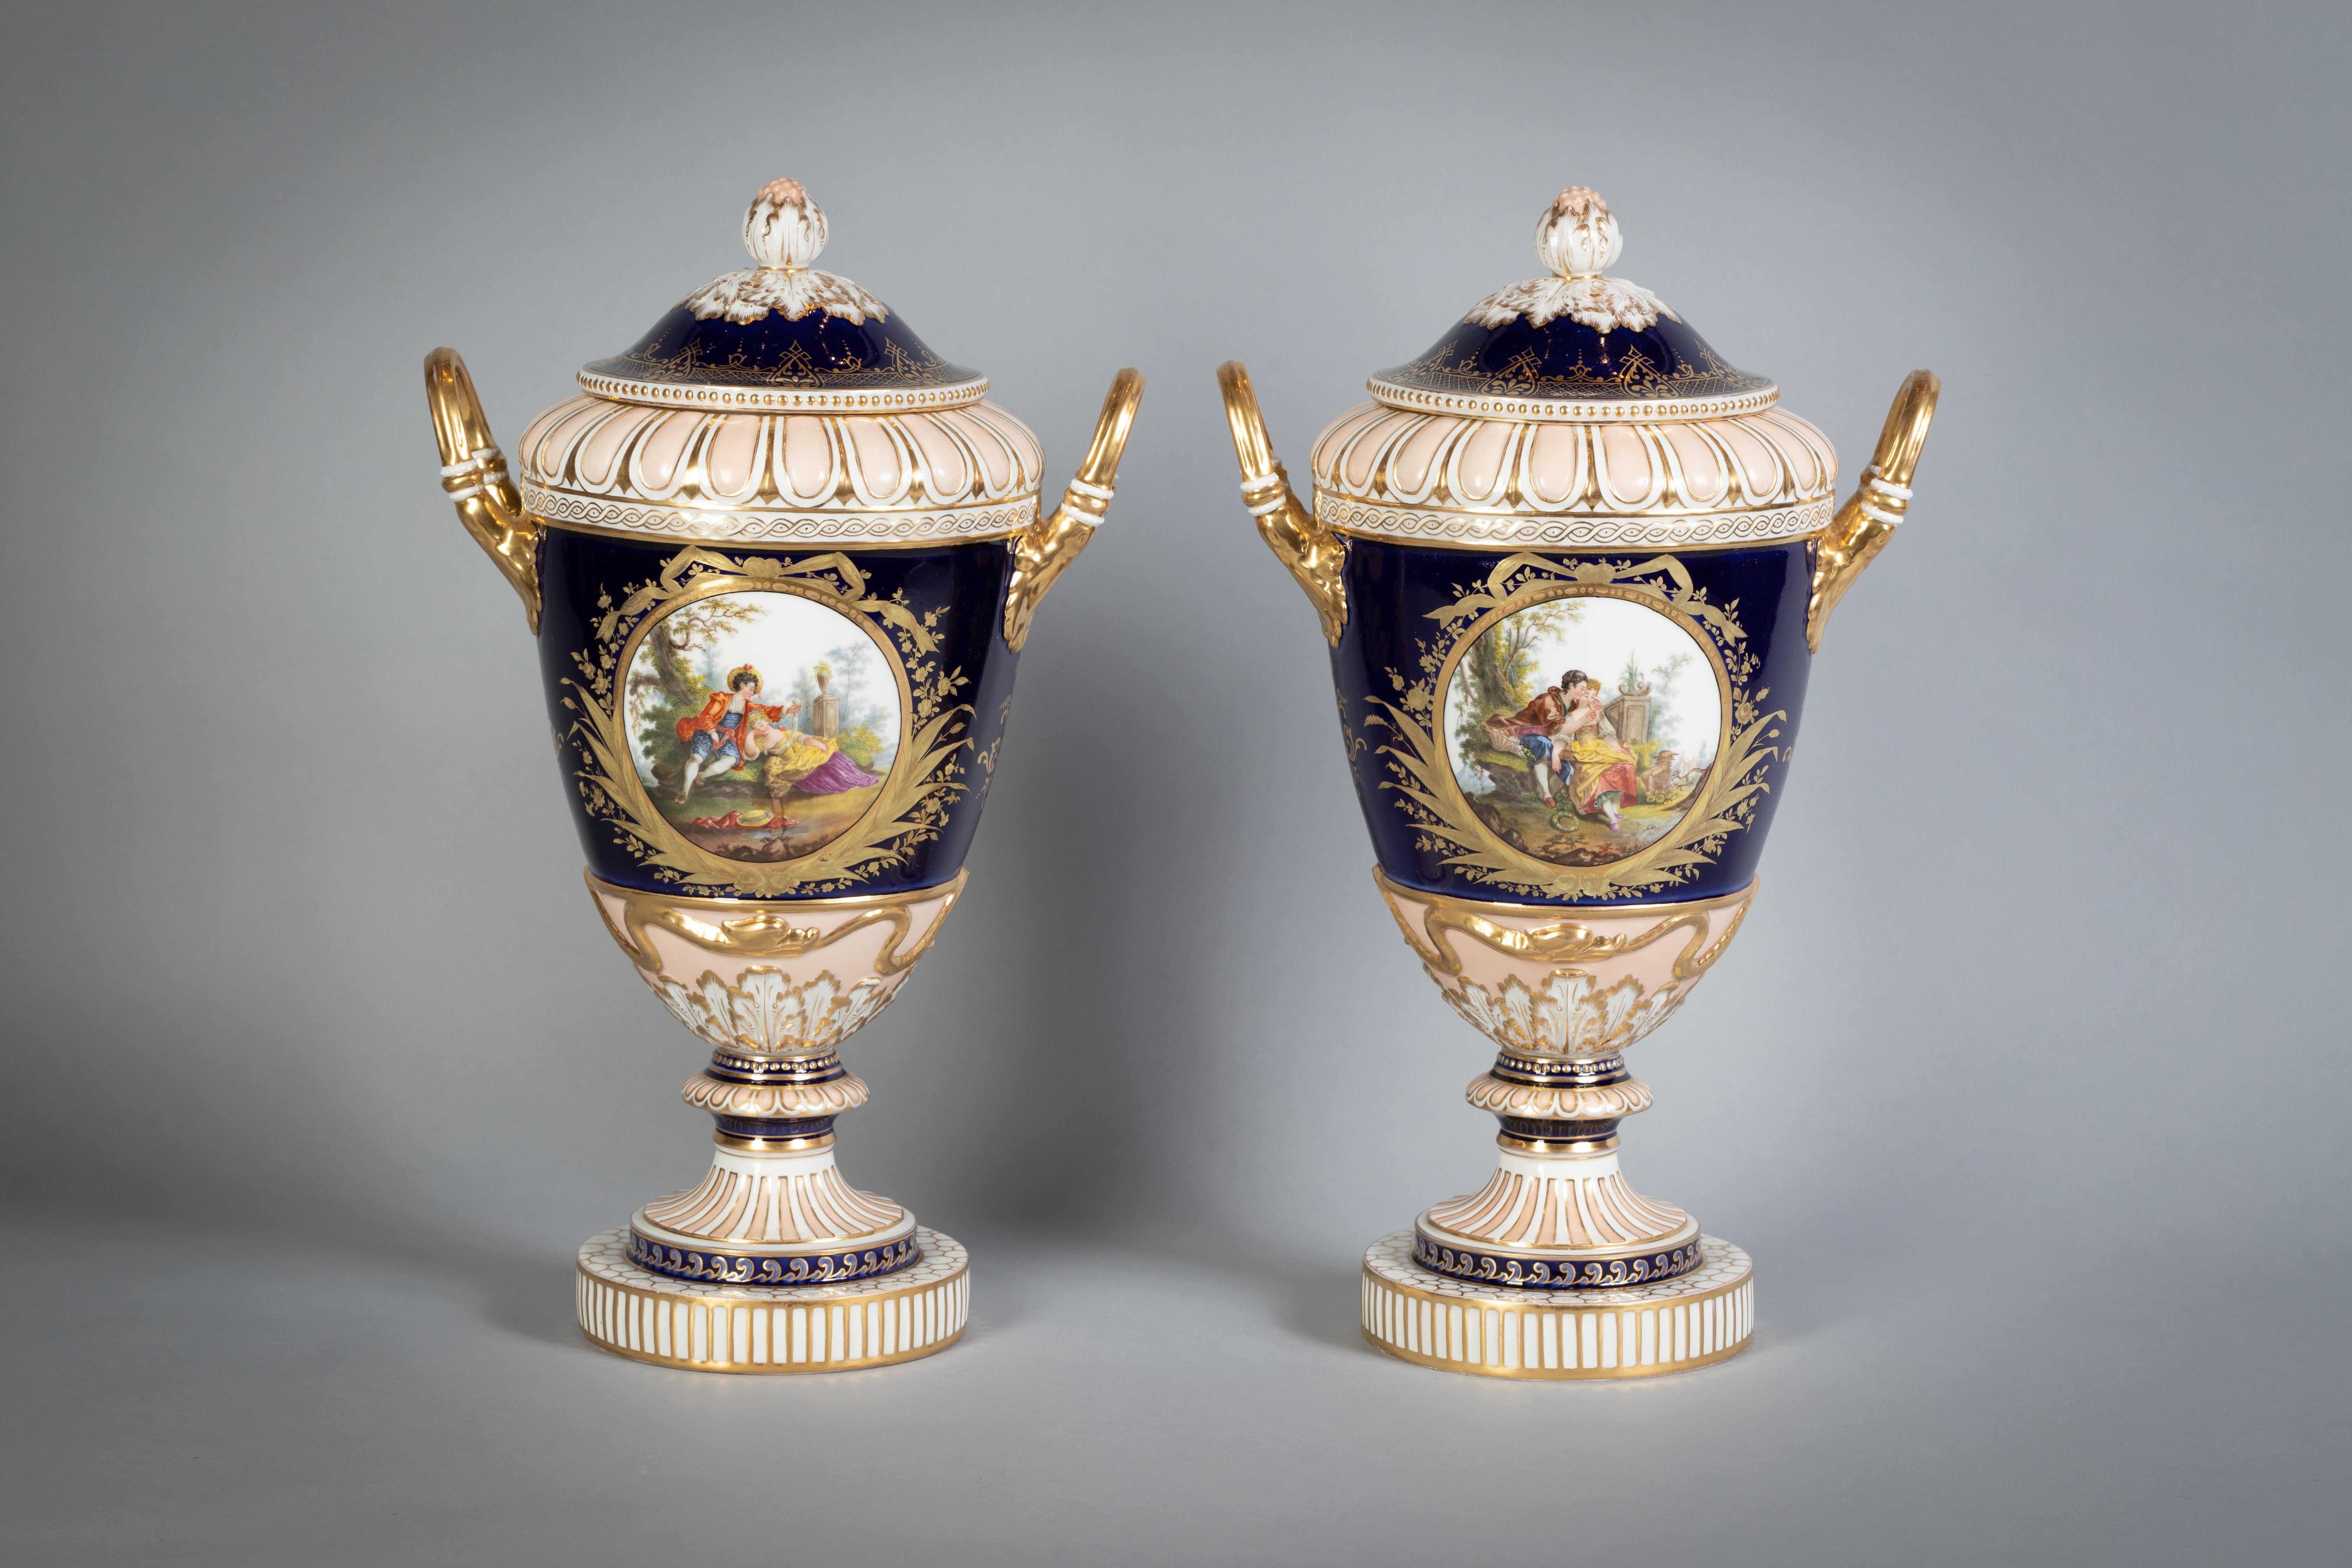 Each relief molded urn flanked by upright handles, painted with roundels with a scene of lovers on the front and back, on a cobalt blue ground.